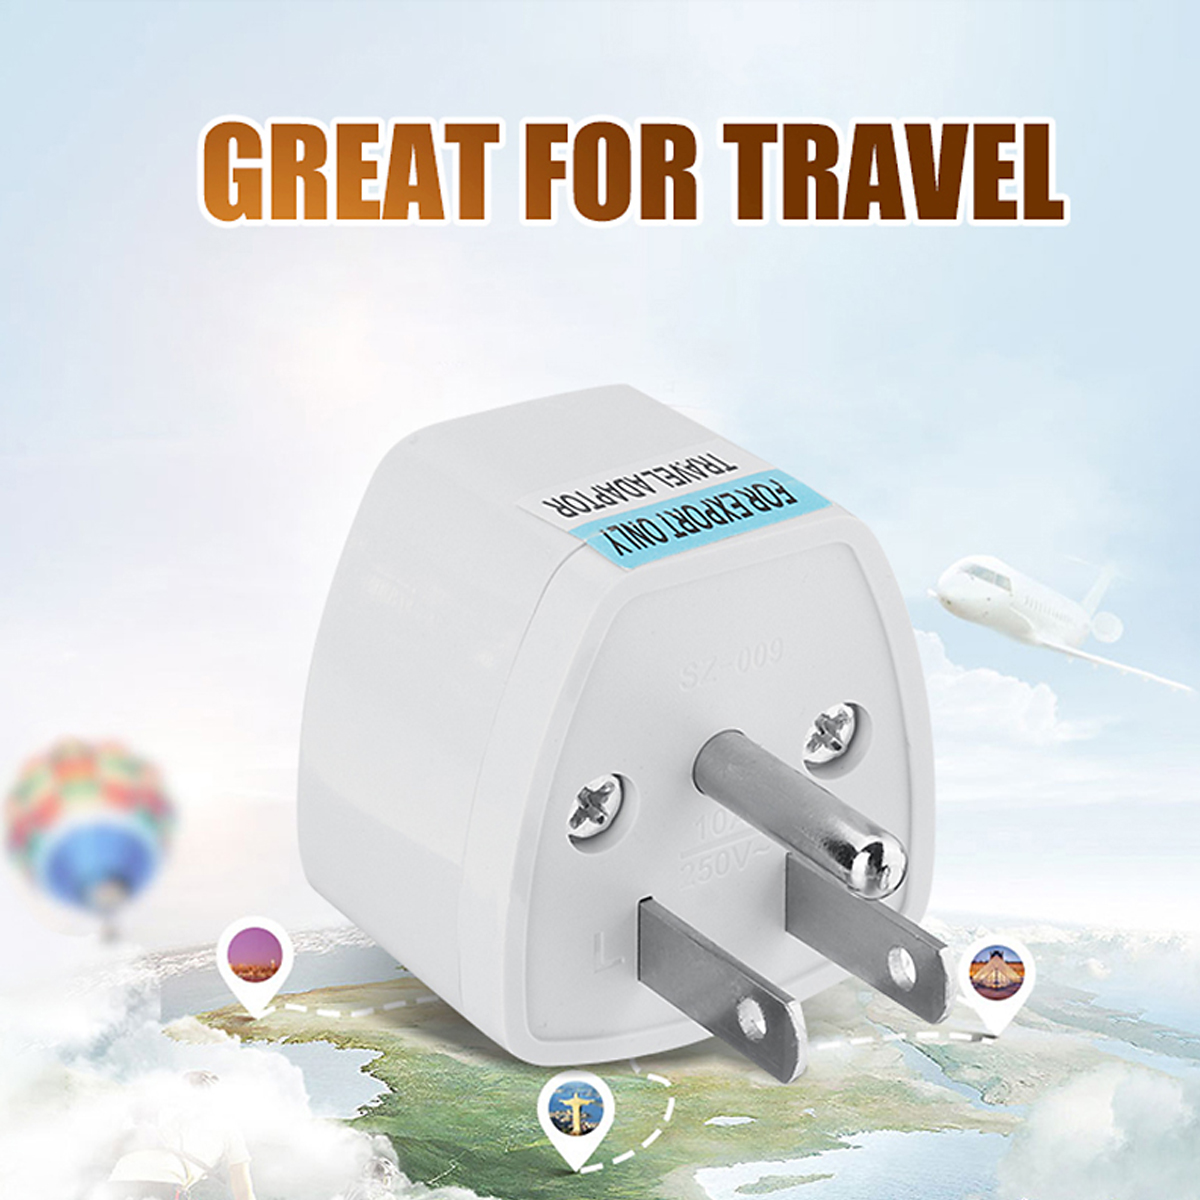 Global-Universal-Adapter-Plug-Adapter-Charger-Travel-Wall-AC-Power-Charger-Outlet-Adapter-Converter-1812356-2